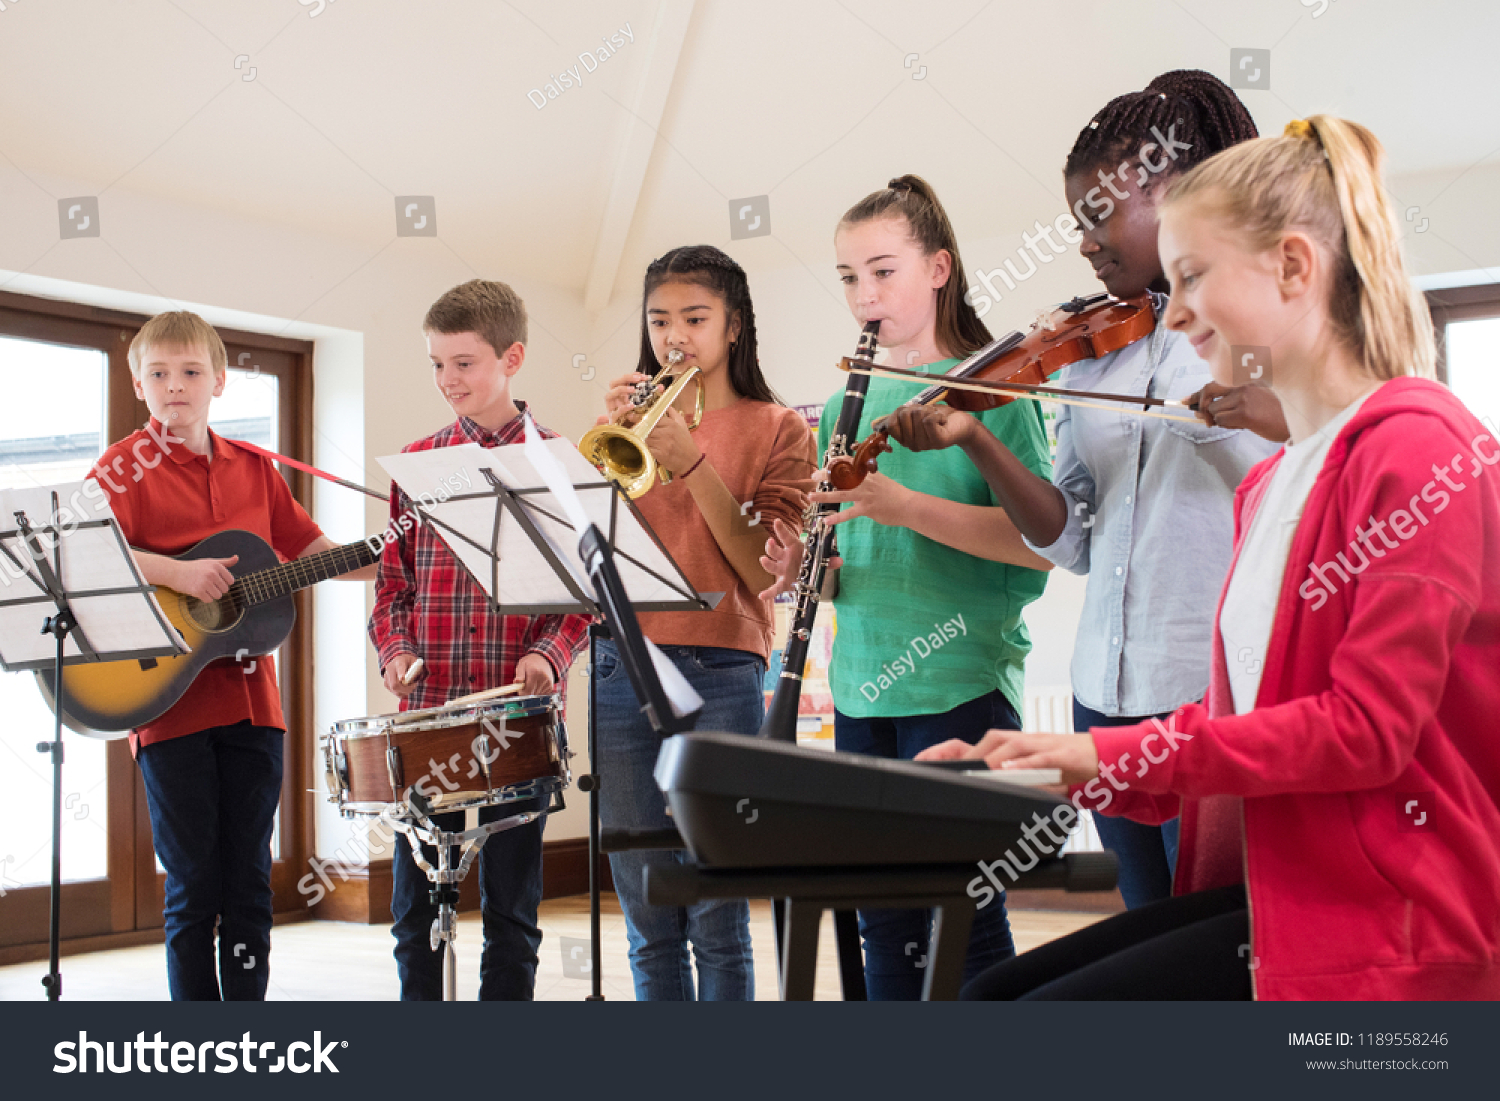 High School Students Playing In School Orchestra Together #1189558246